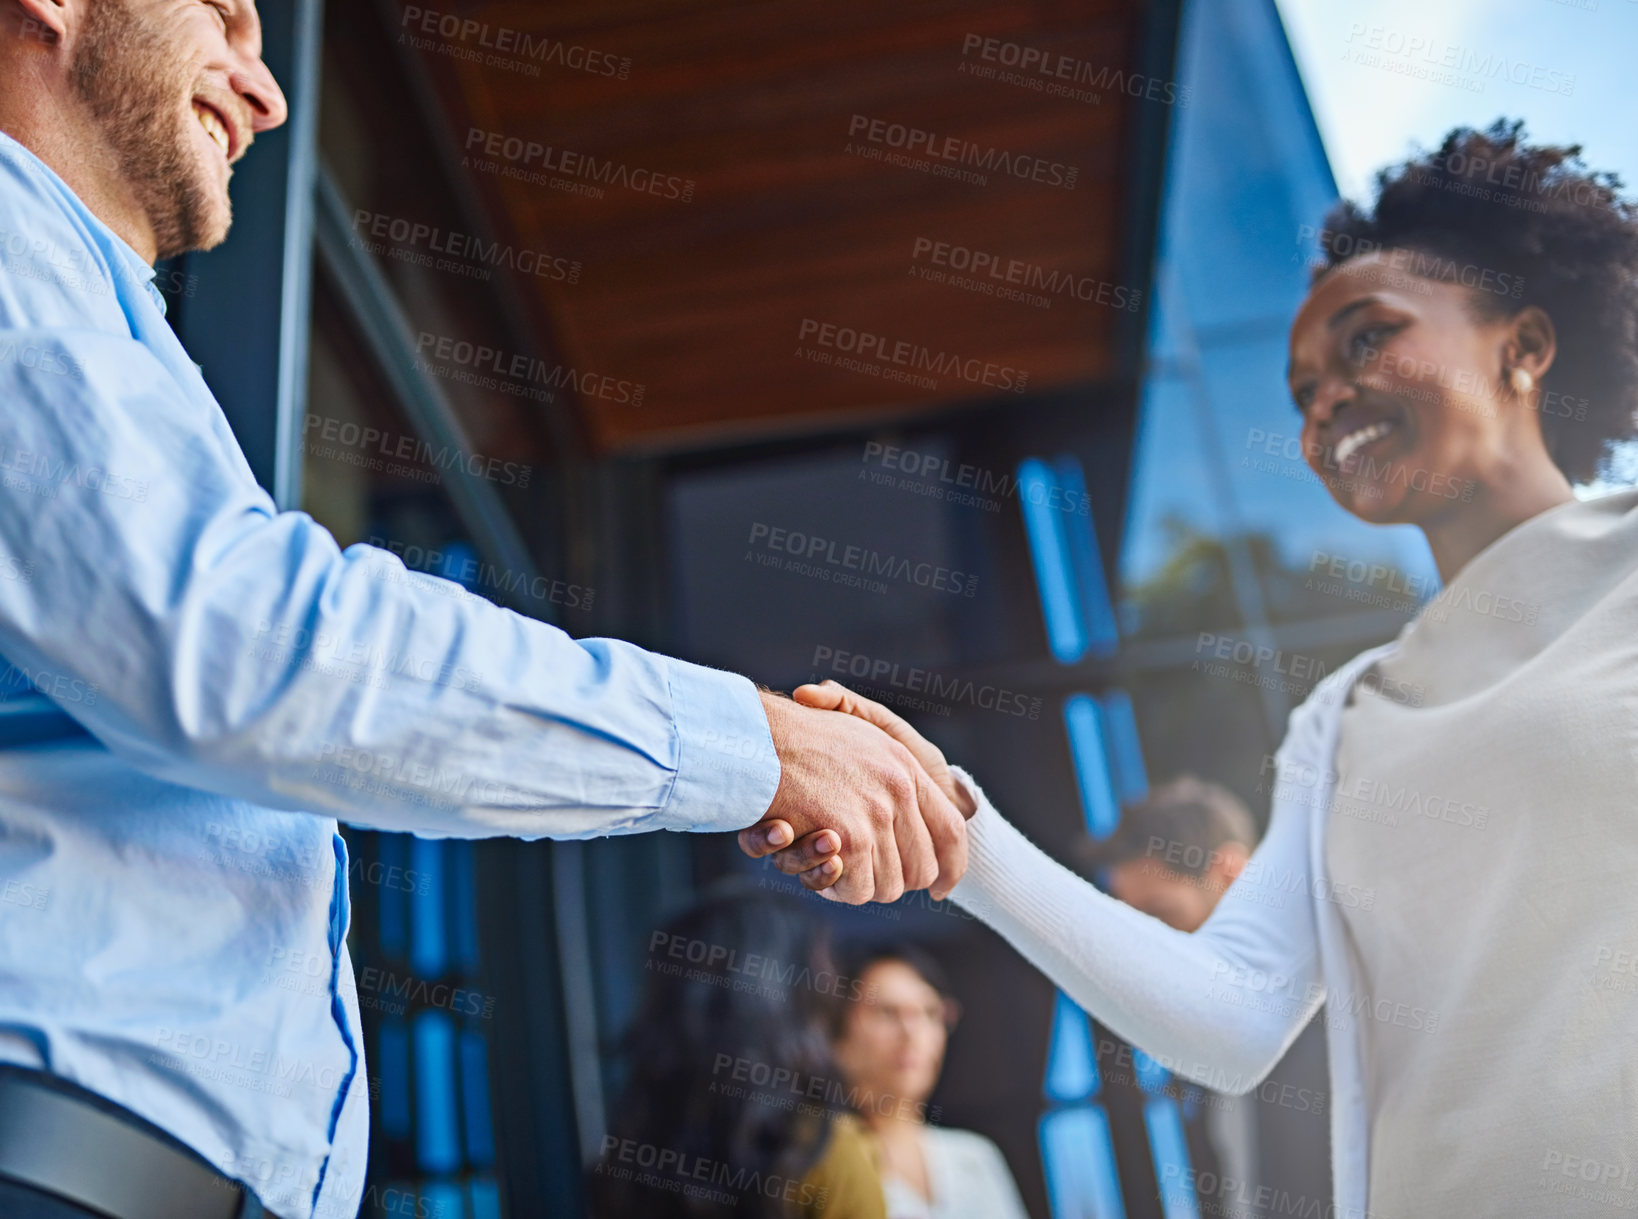 Buy stock photo Cropped shot of two businesspeople shaking hands with their coworkers in the background